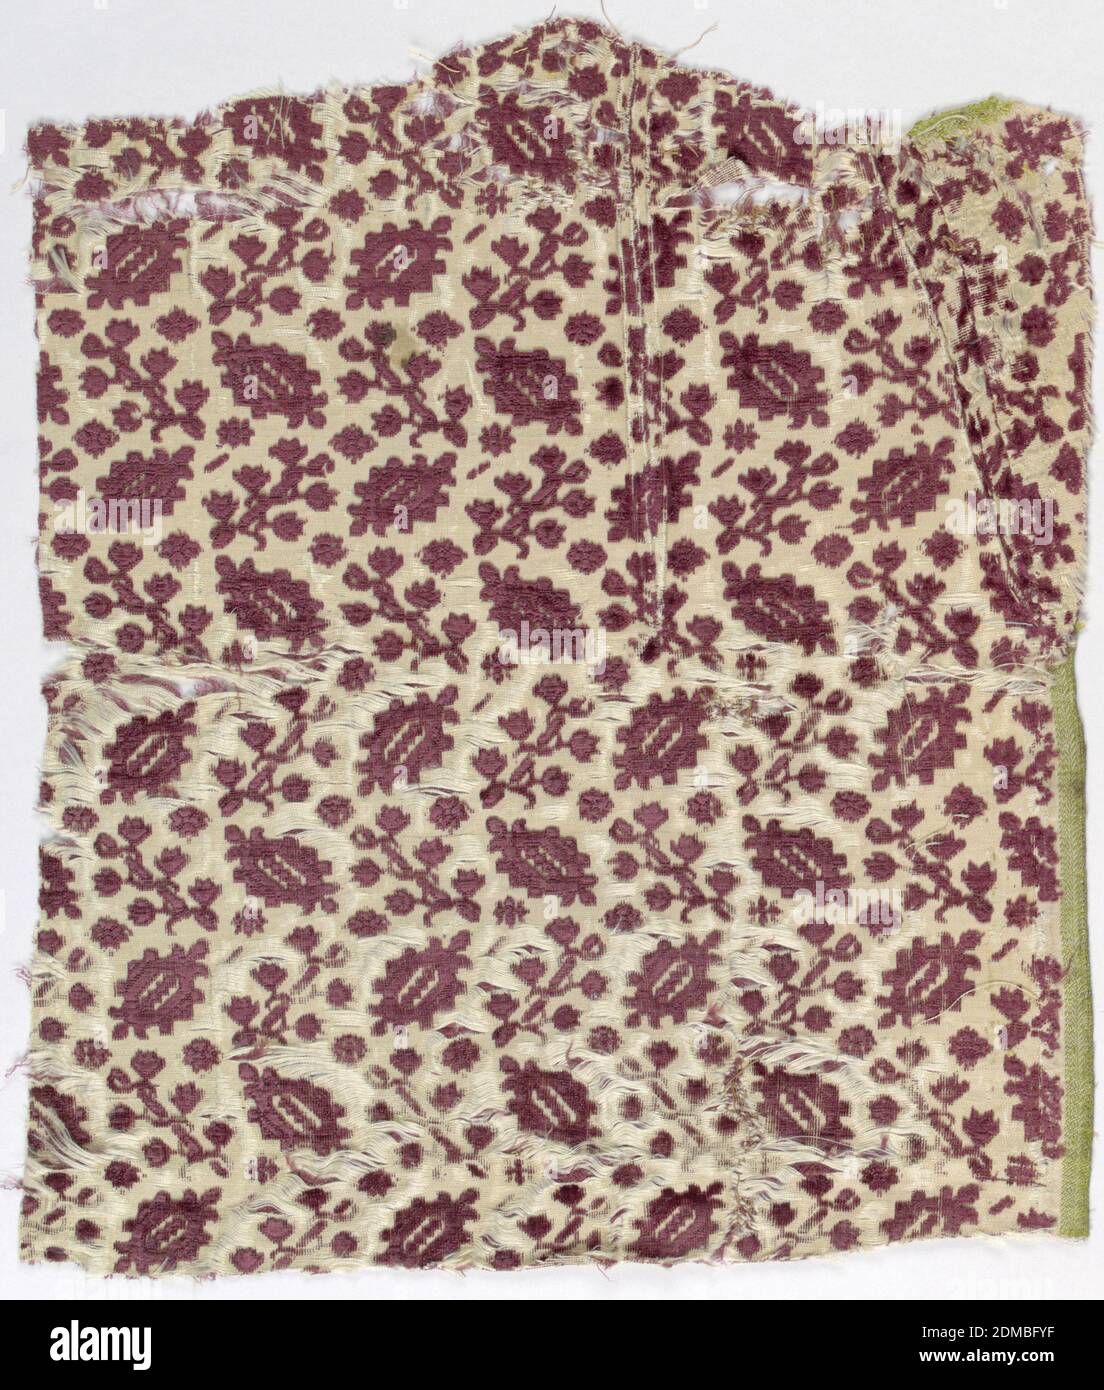 Fragment, Medium: silk Technique: cut and uncut supplementary warp pile in a five-harness satin foundation (ciselé voided velvet), Rows of diagonally aligned motifs in dull purple on an ivory voided ground. One motif is an elaborate lozenge, the other a flowering vine wrapped on a rod. The diagonal alignment is reversed from row to row; interspaces are filled with tiny rosettes., 17th century, woven textiles, Fragment Stock Photo